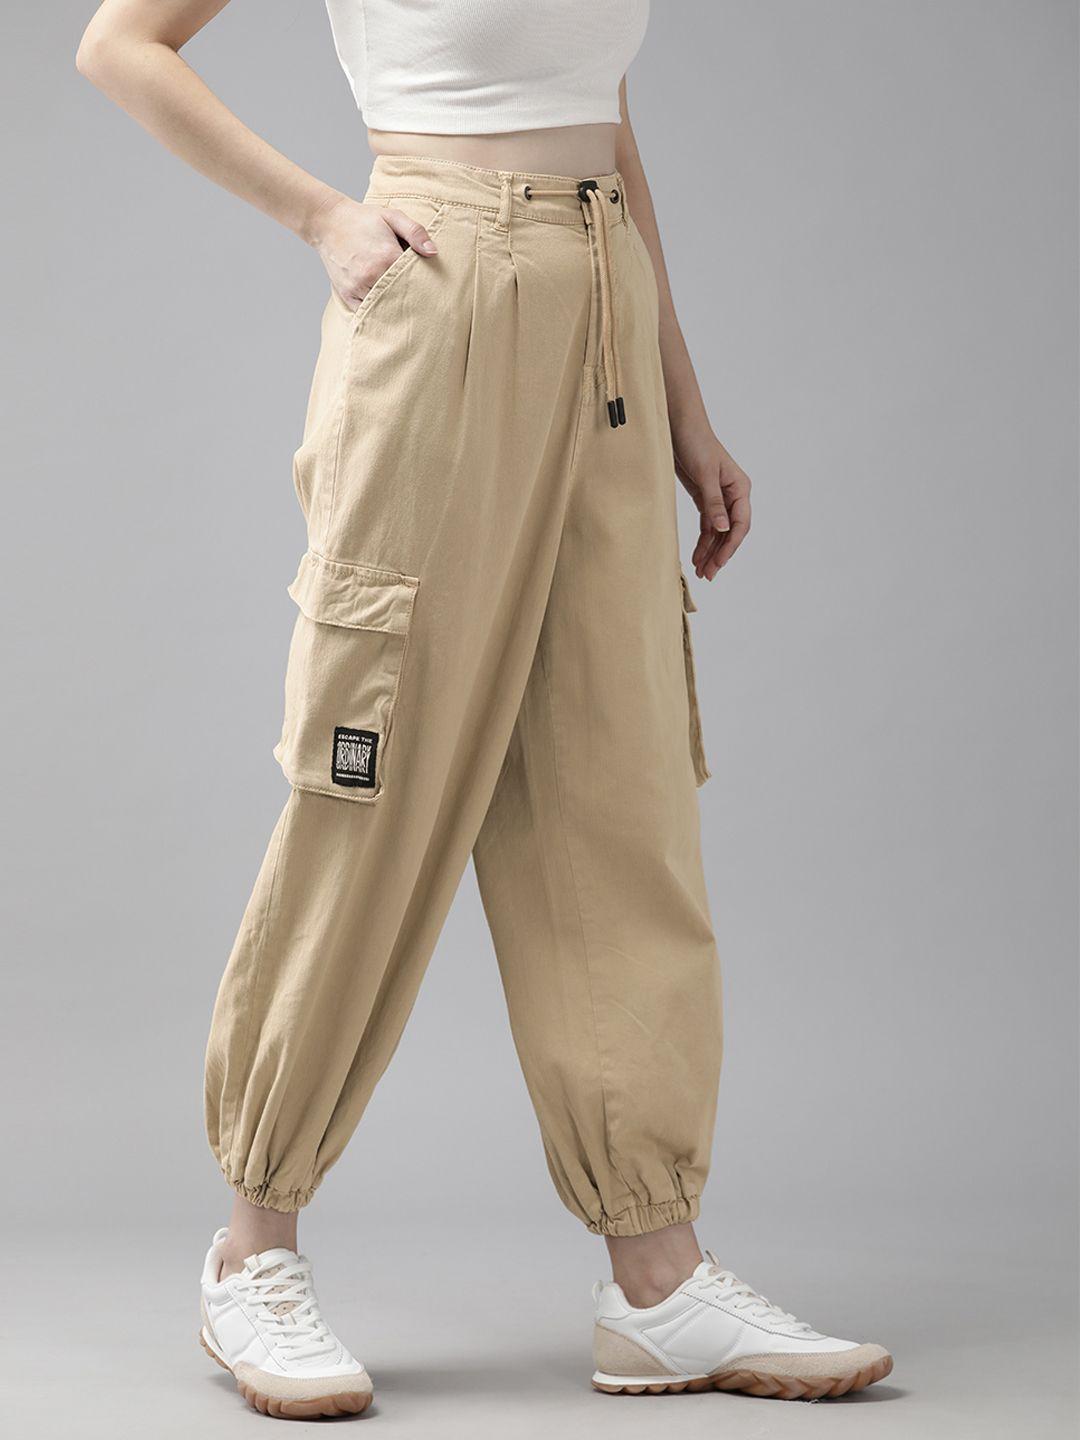 the roadster lifestyle co. women regular fit cargo joggers